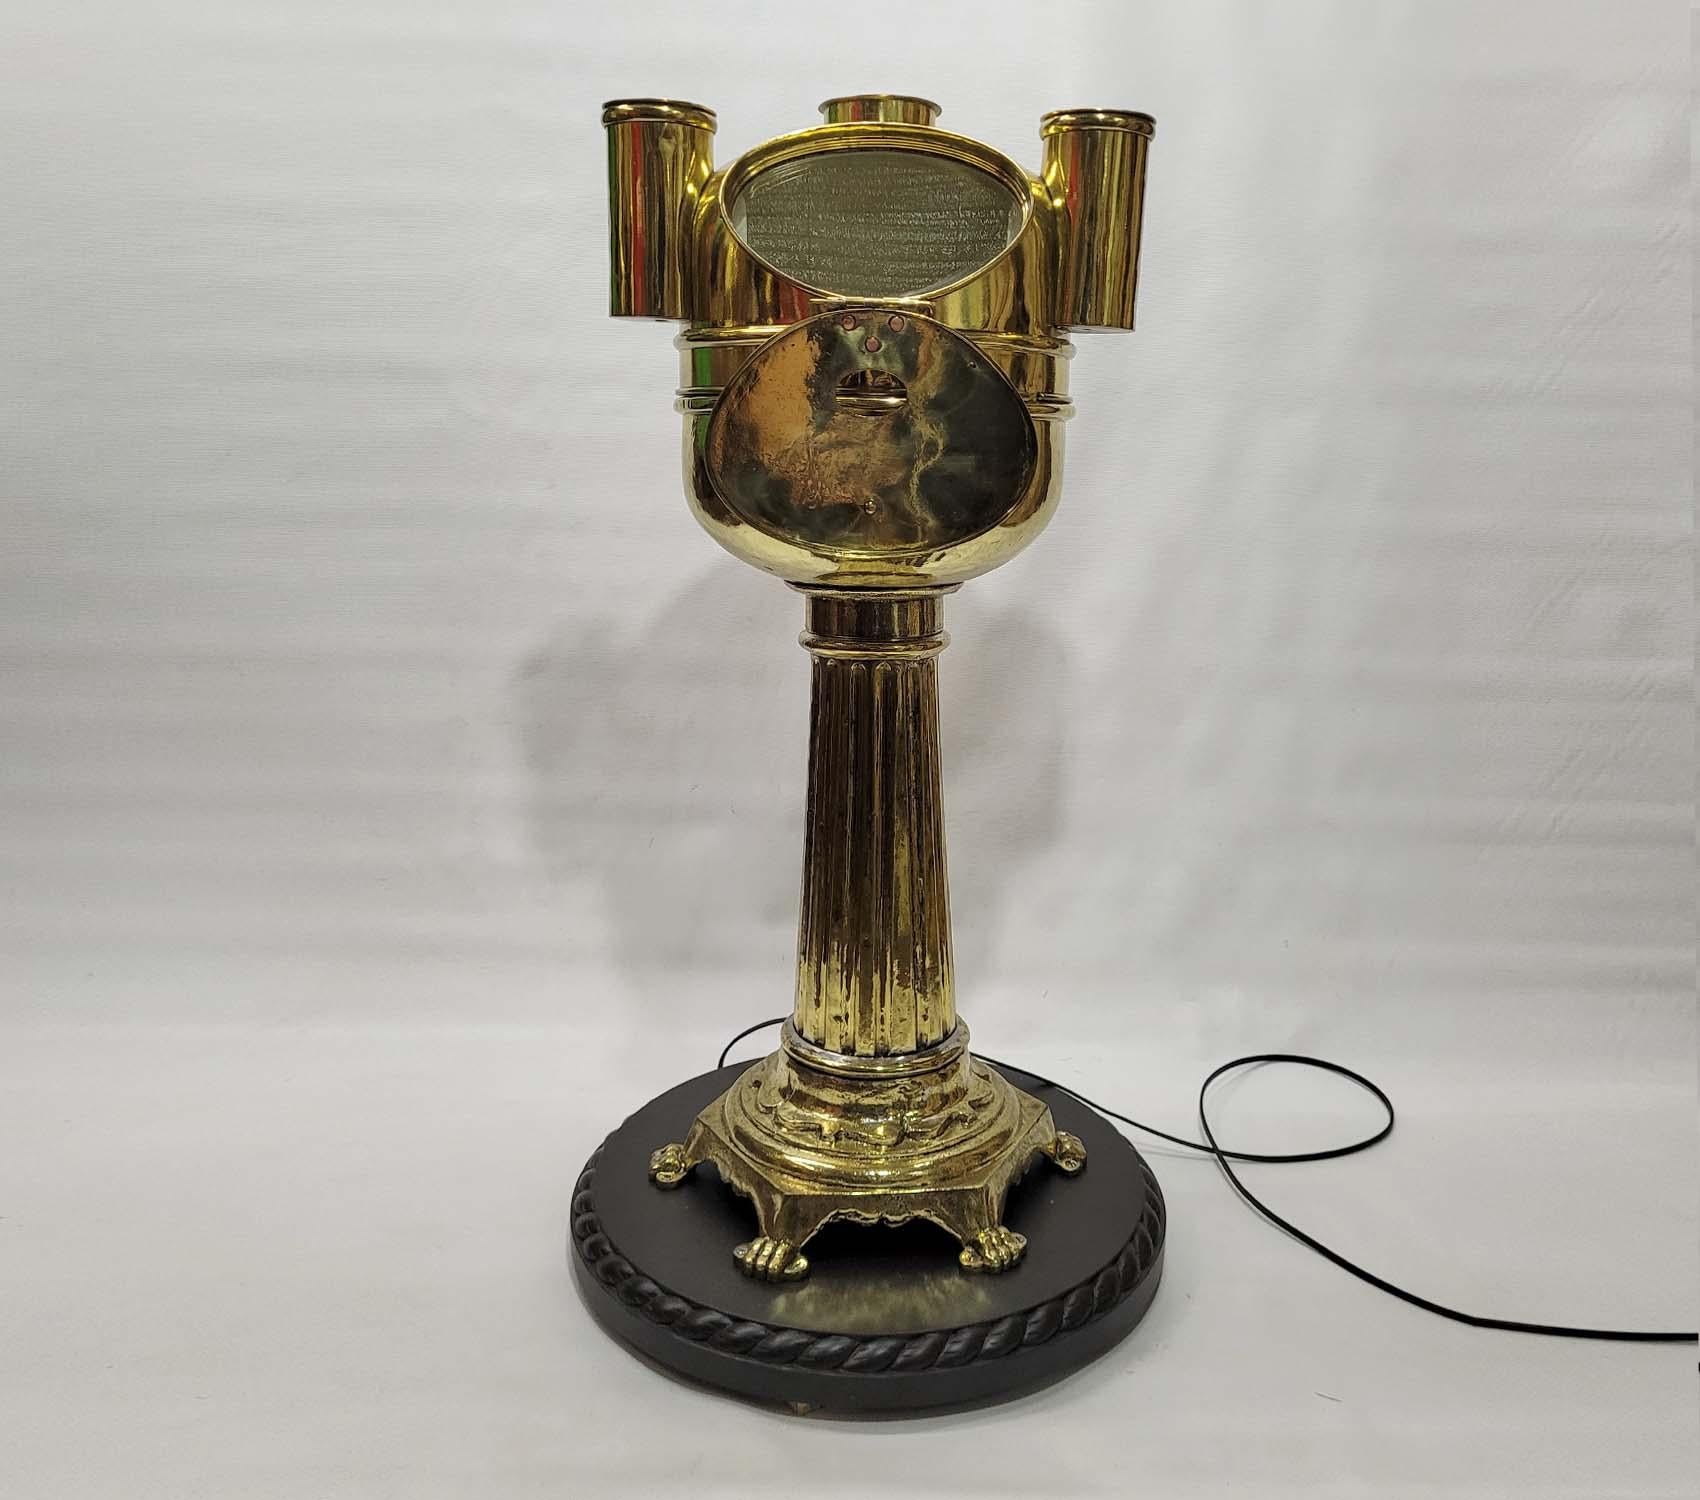 Ornate American Yacht Binnacle Circa 1900 In Good Condition For Sale In Norwell, MA